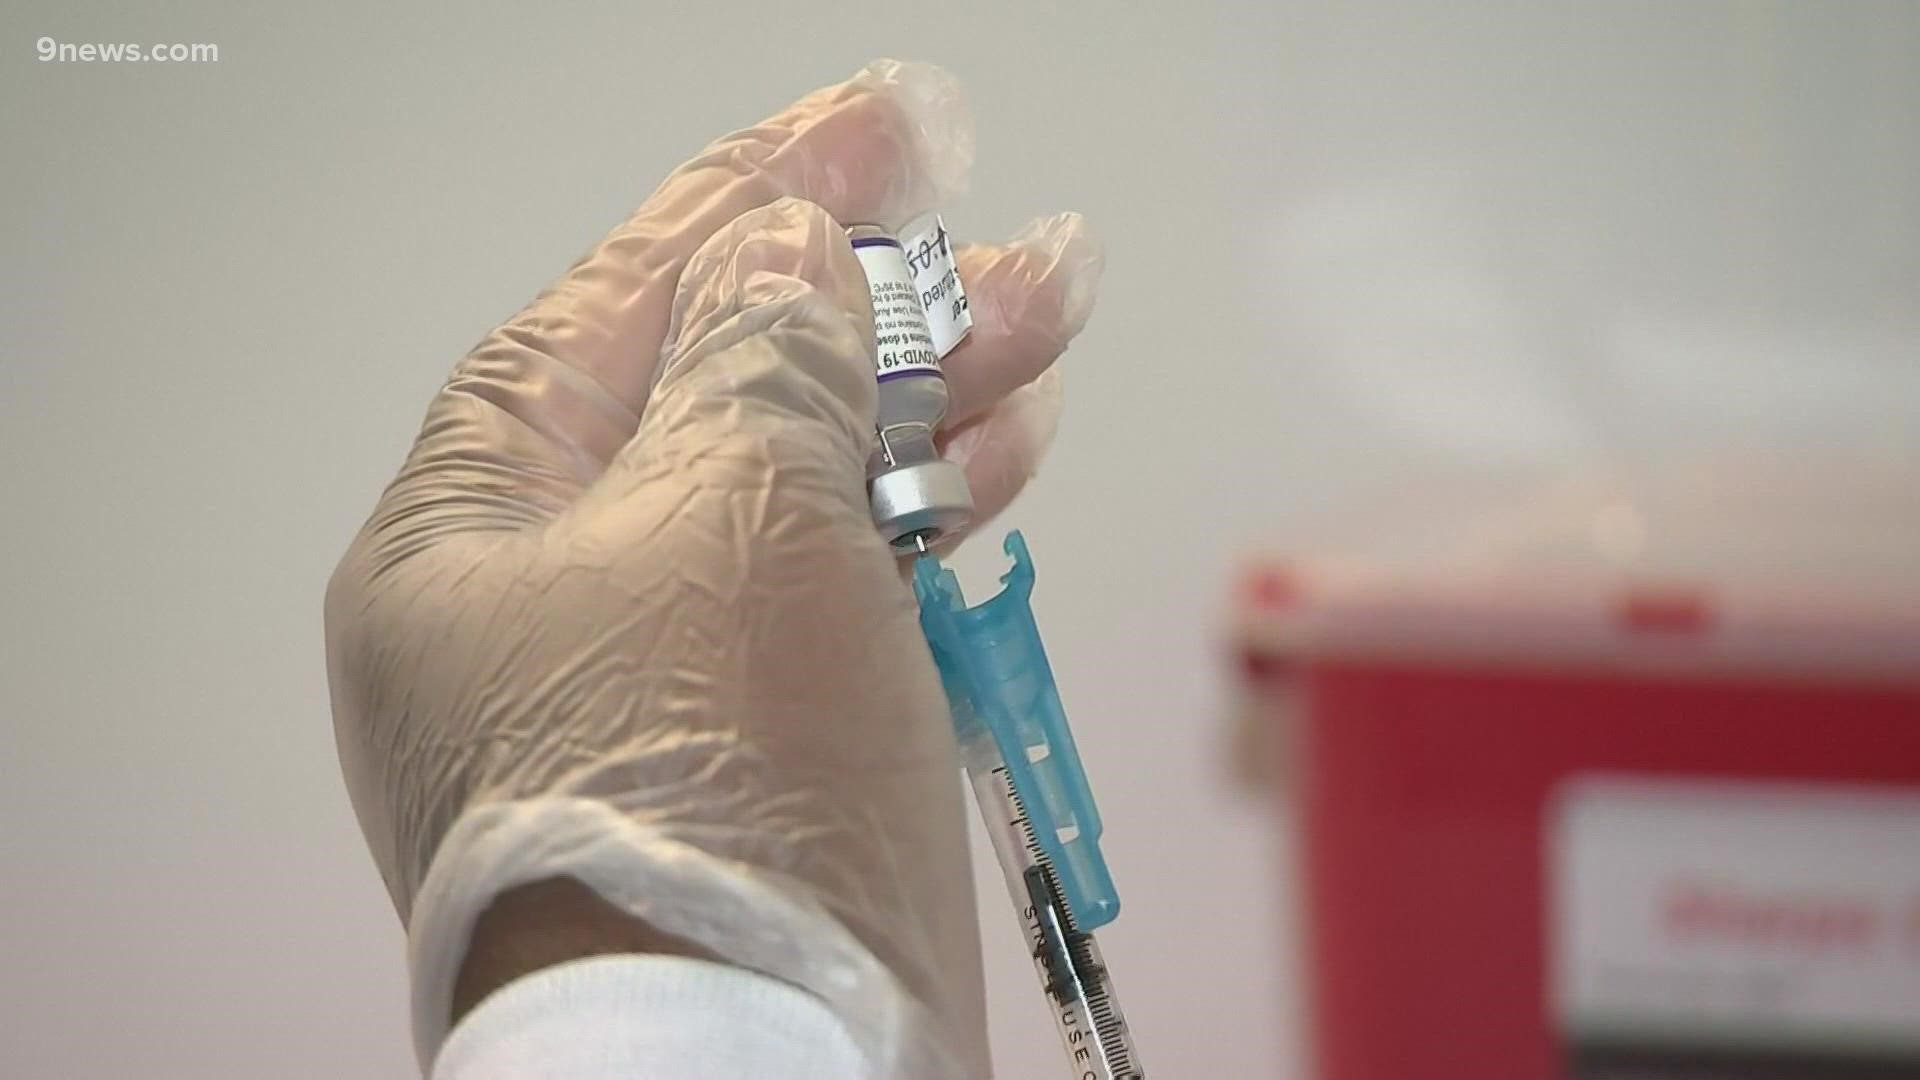 Unvaccinated patients make up 80% of COVID hospitalizations in Colorado. Doctors say health concerns, age and waning vaccine efficacy cause breakthroughs for others.